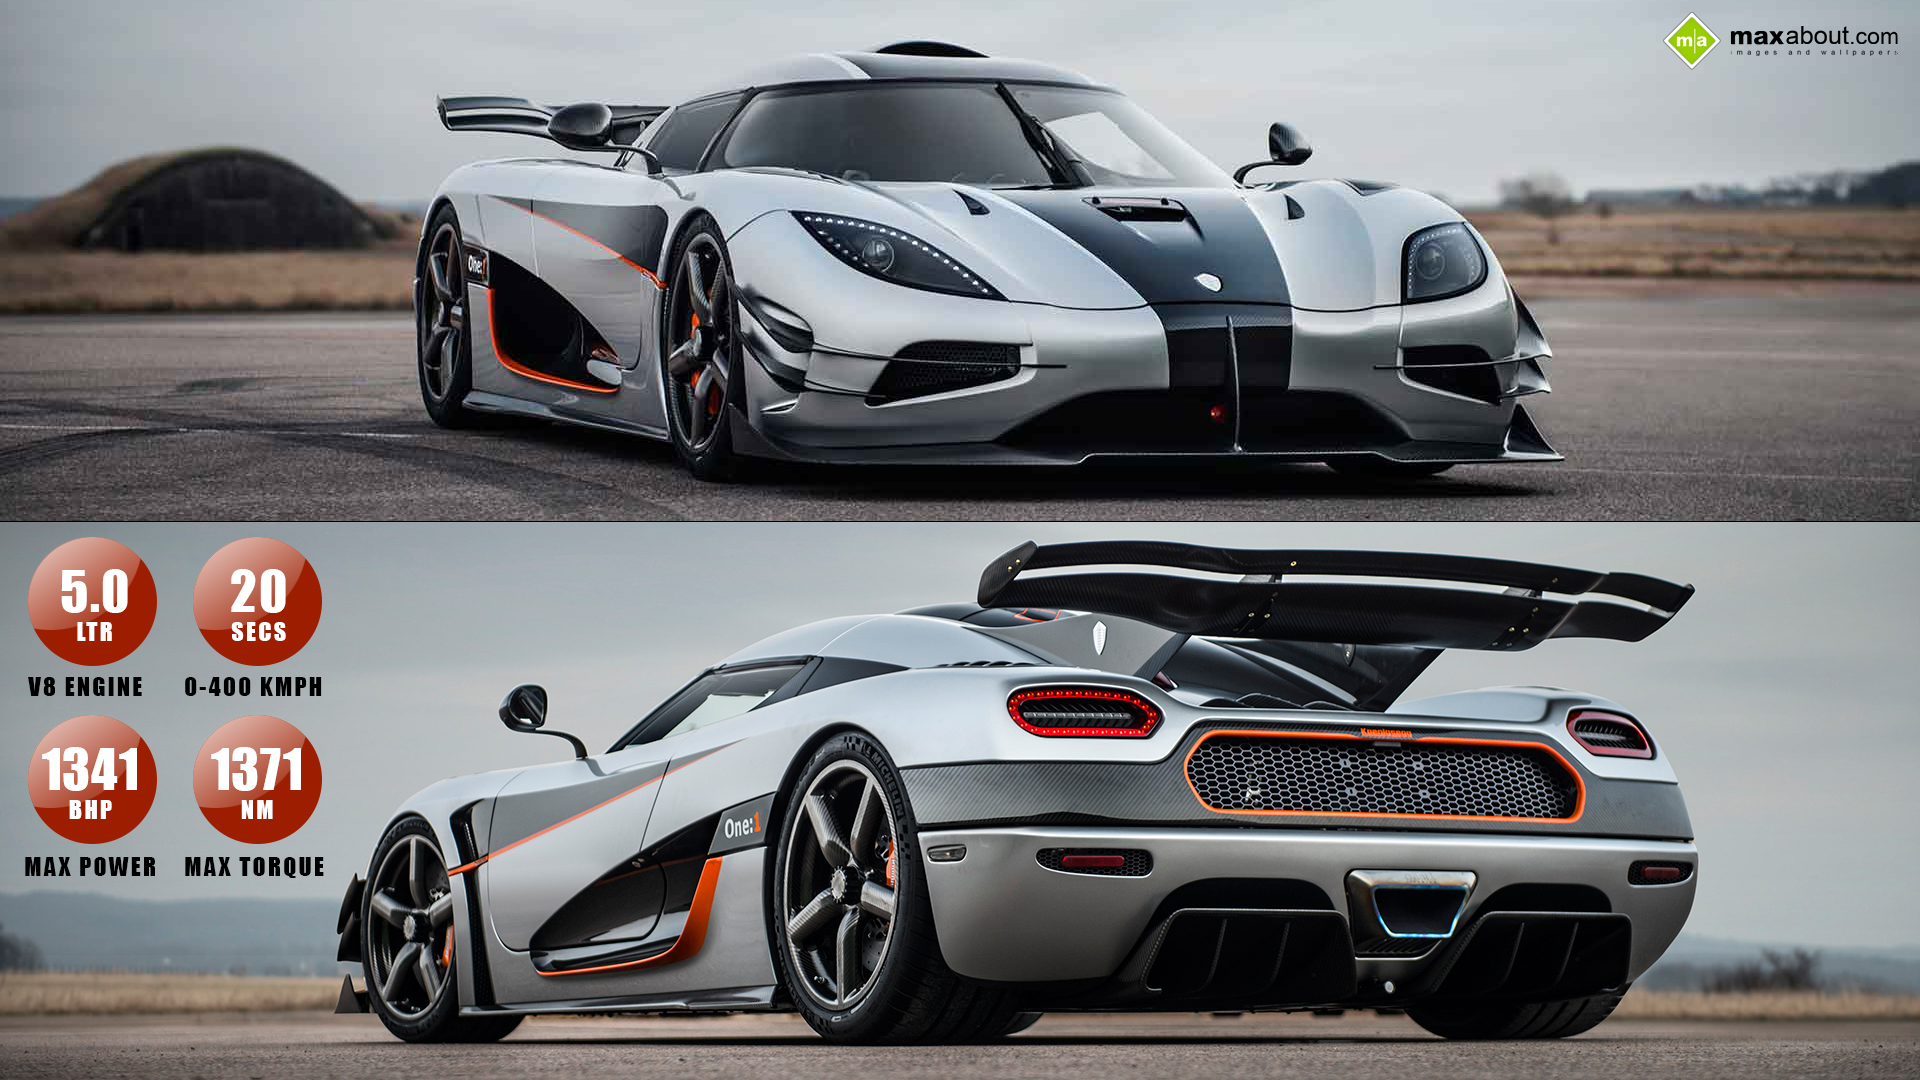 When was koenigsegg founded